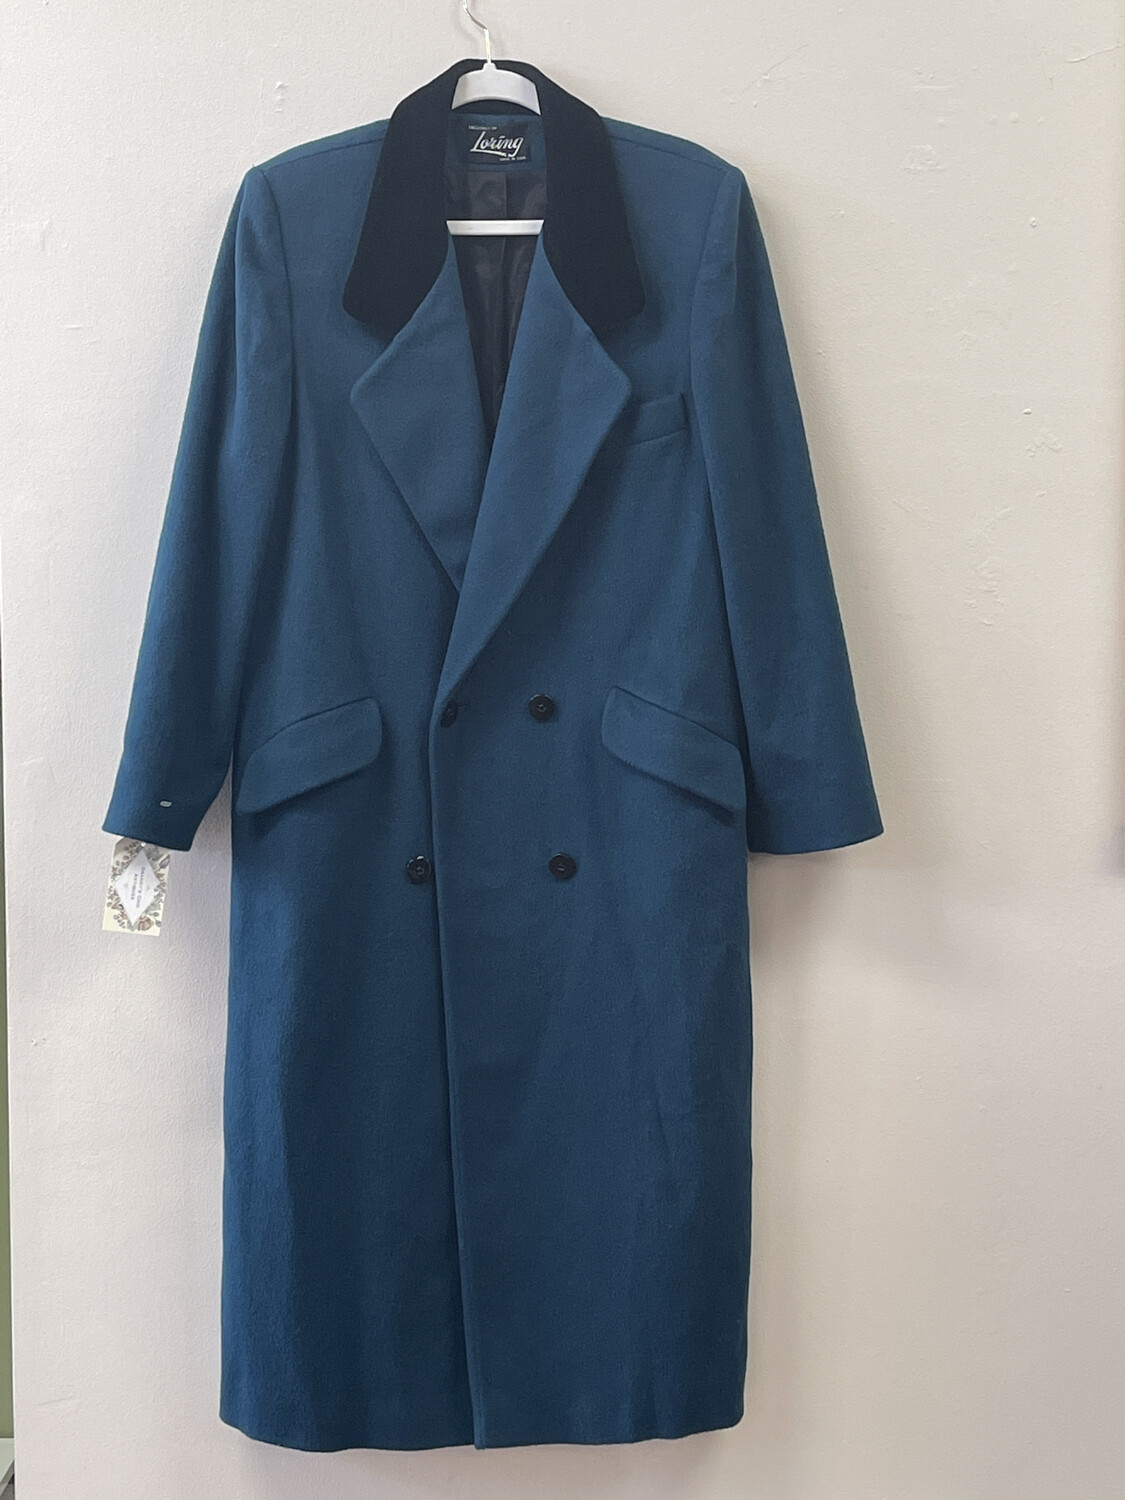 Vintage Double-Breasted Loring Coat with Blue Velveteen Collar